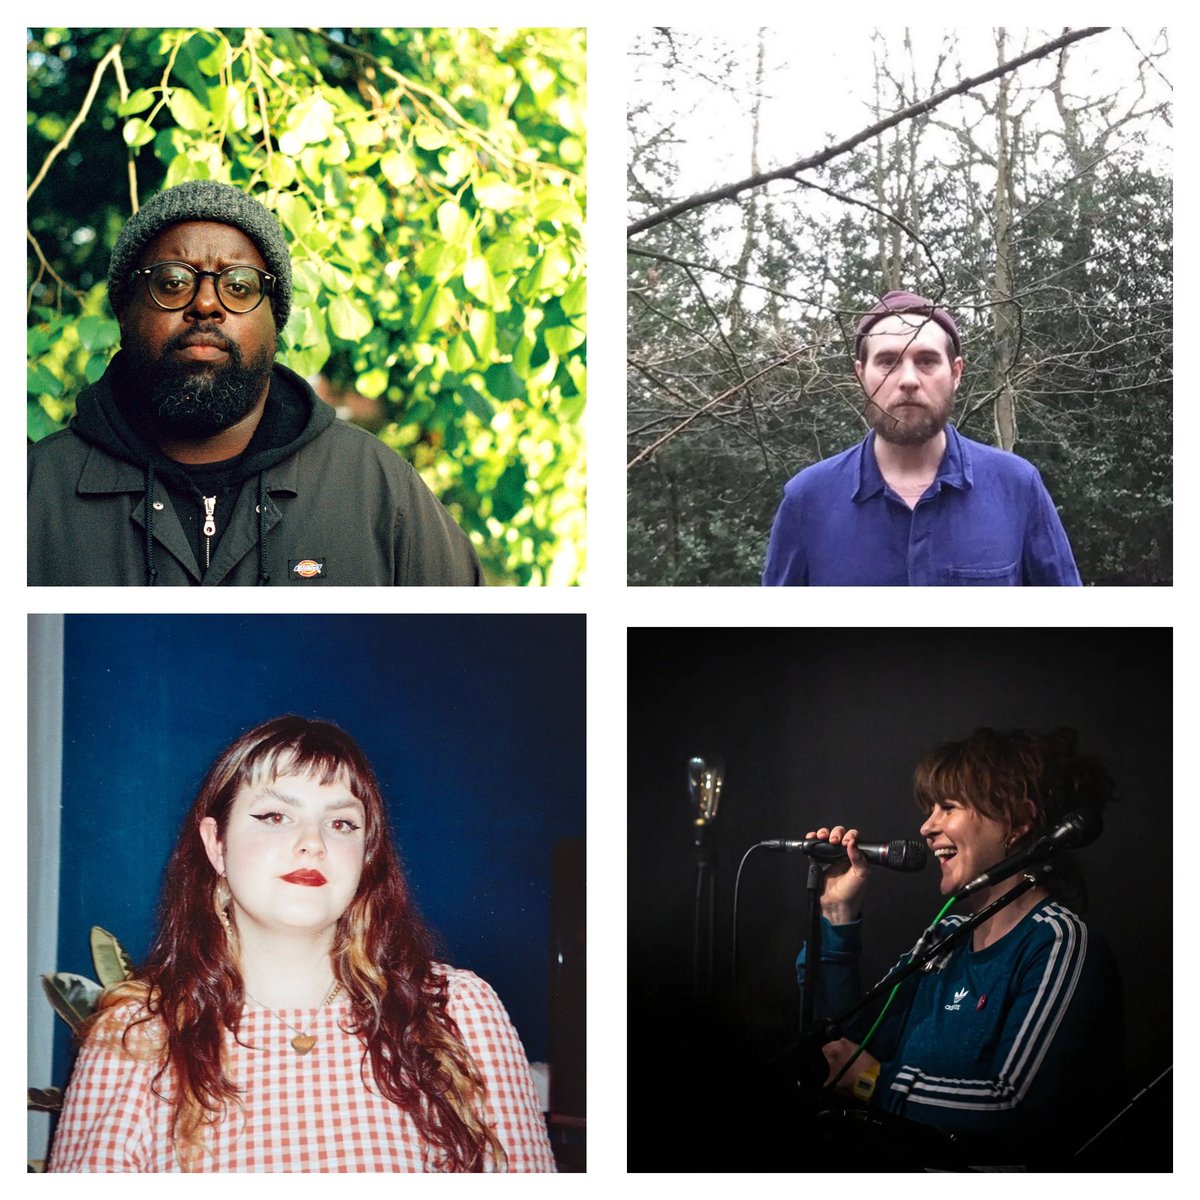 SIX tickets remain for Chapter TWO of our 19th Birthday Featuring .... @hellodaudi @testcardgirl84 Penny @goodgoodblood Live @DarkWoodsCoffee / this Sunday 5pm - 9pm wegottickets.com/reddeerclub/